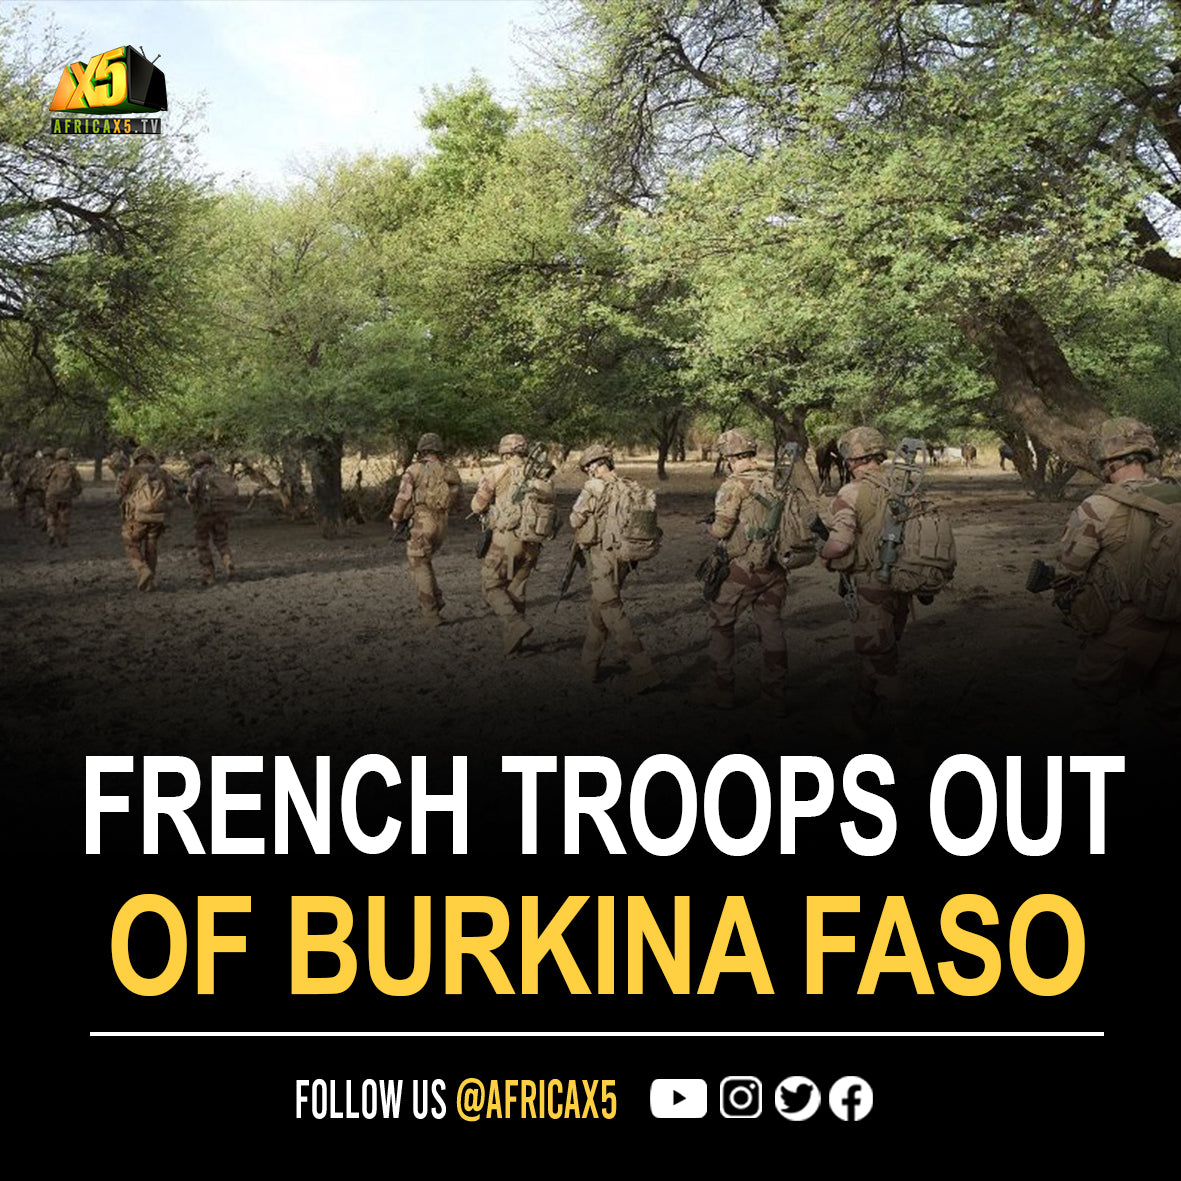 Burkina Faso scrapped a 1961 agreement on military assistance with France, a move that comes only weeks after it told the French ambassador and troops supporting its anti-jihadist campaign to exit the country.